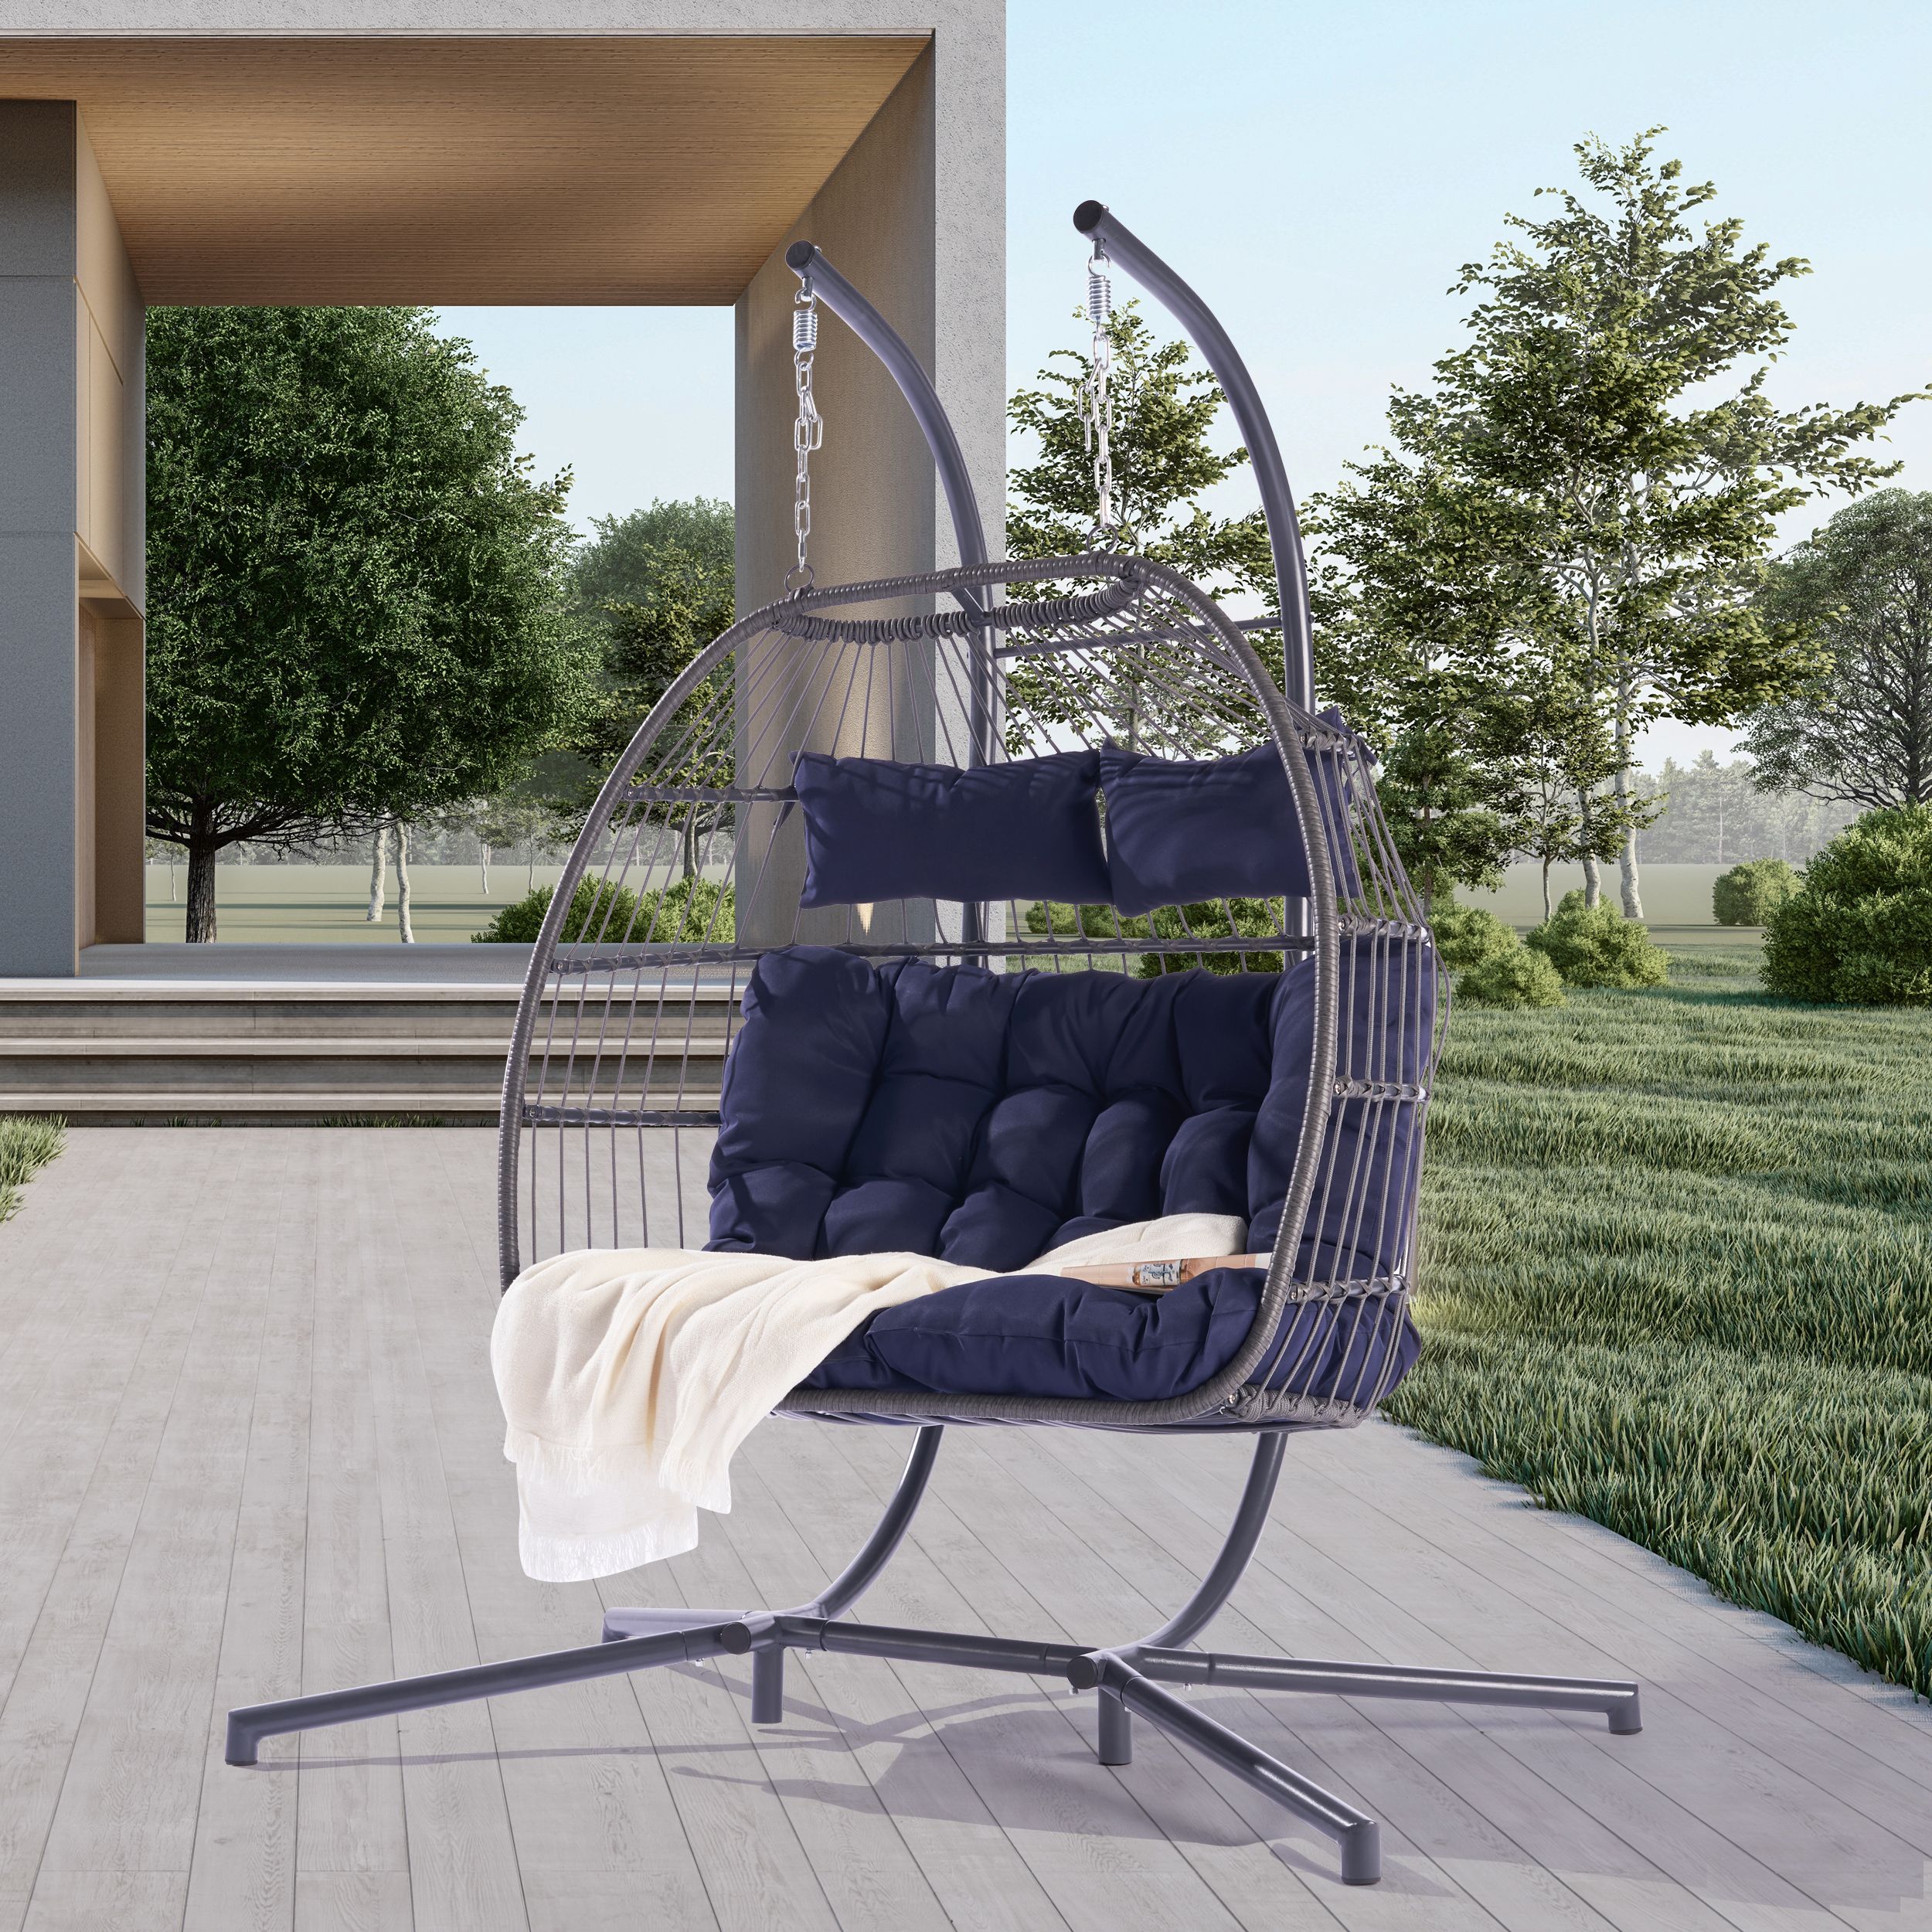 Image of Hammock patio set with hammock and chairs